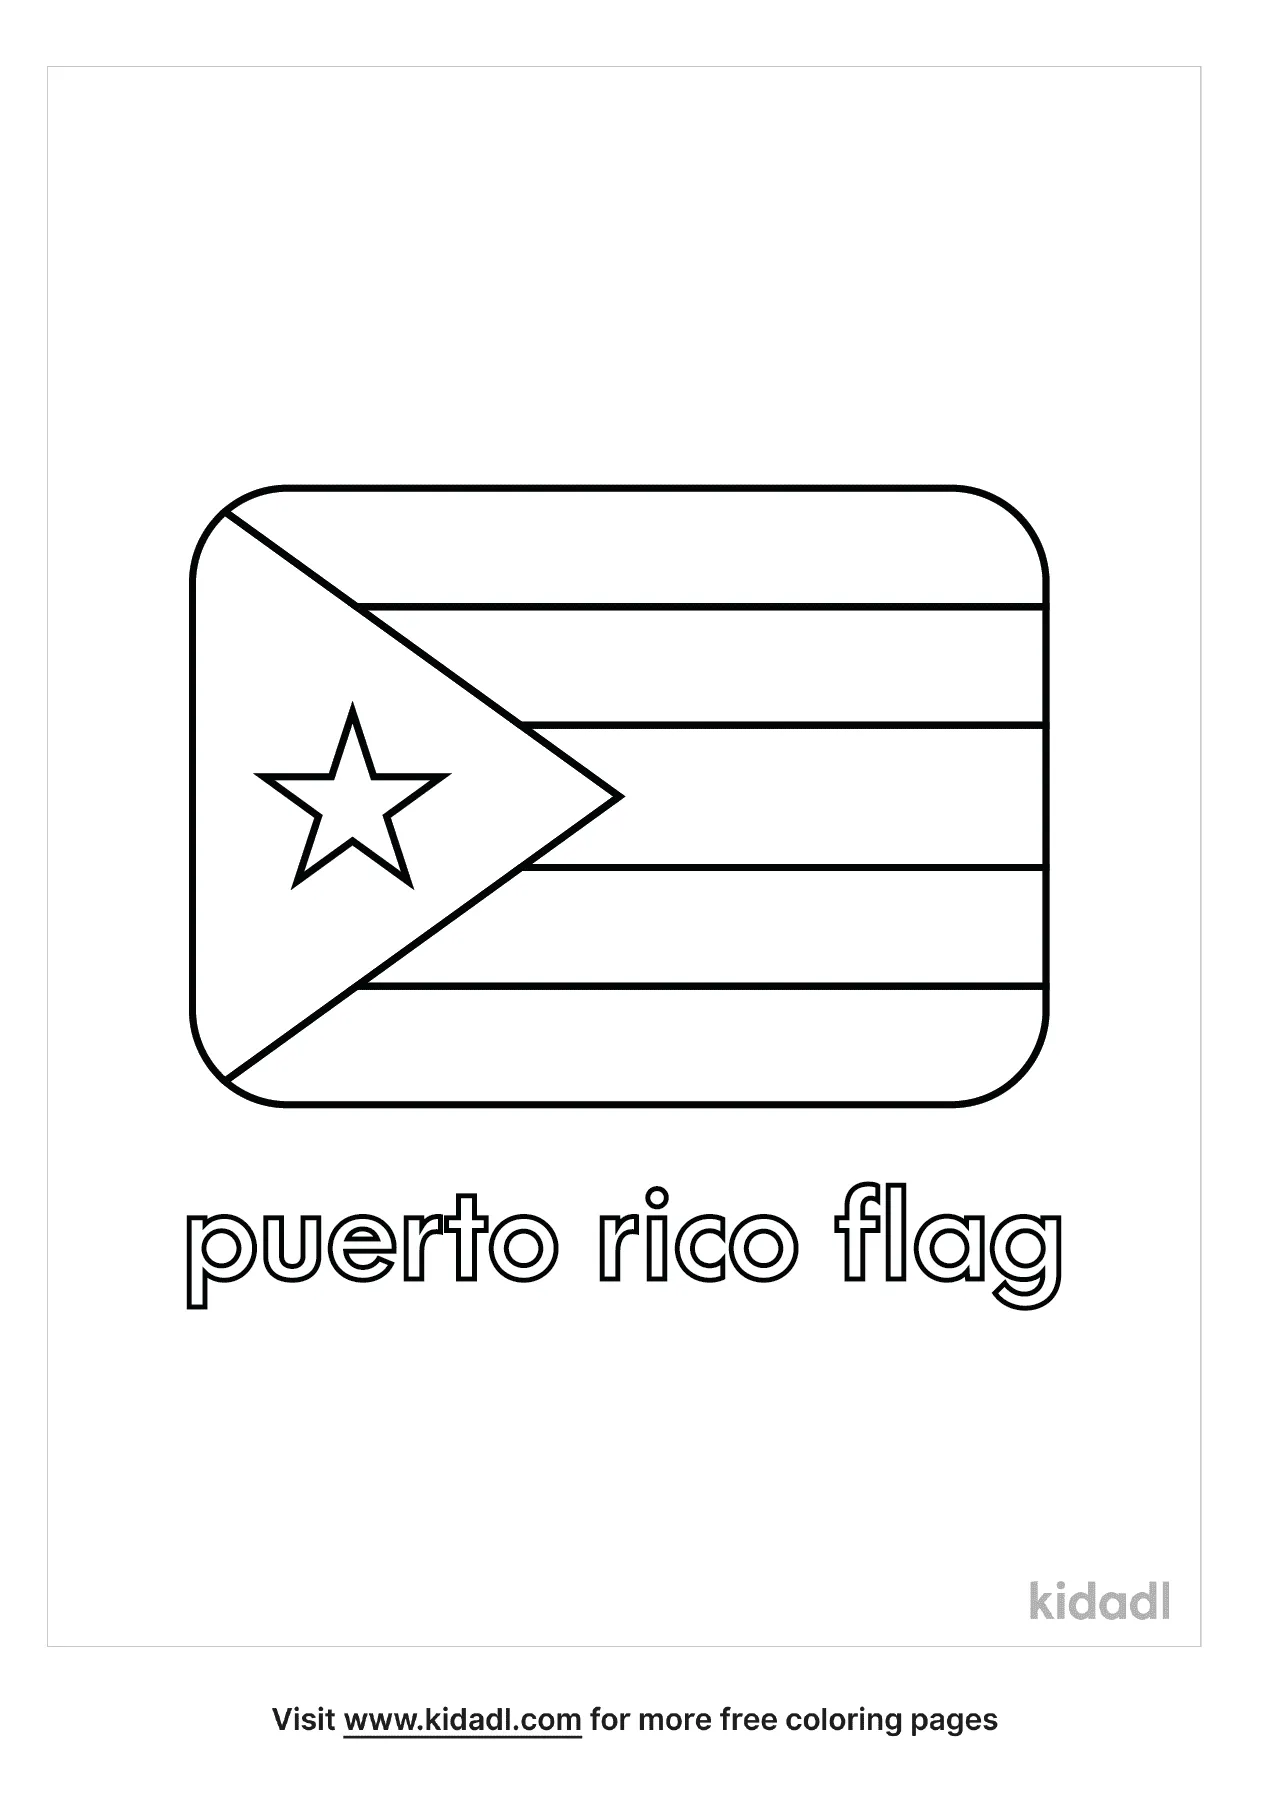 Free puerto rico flag coloring page coloring page printables